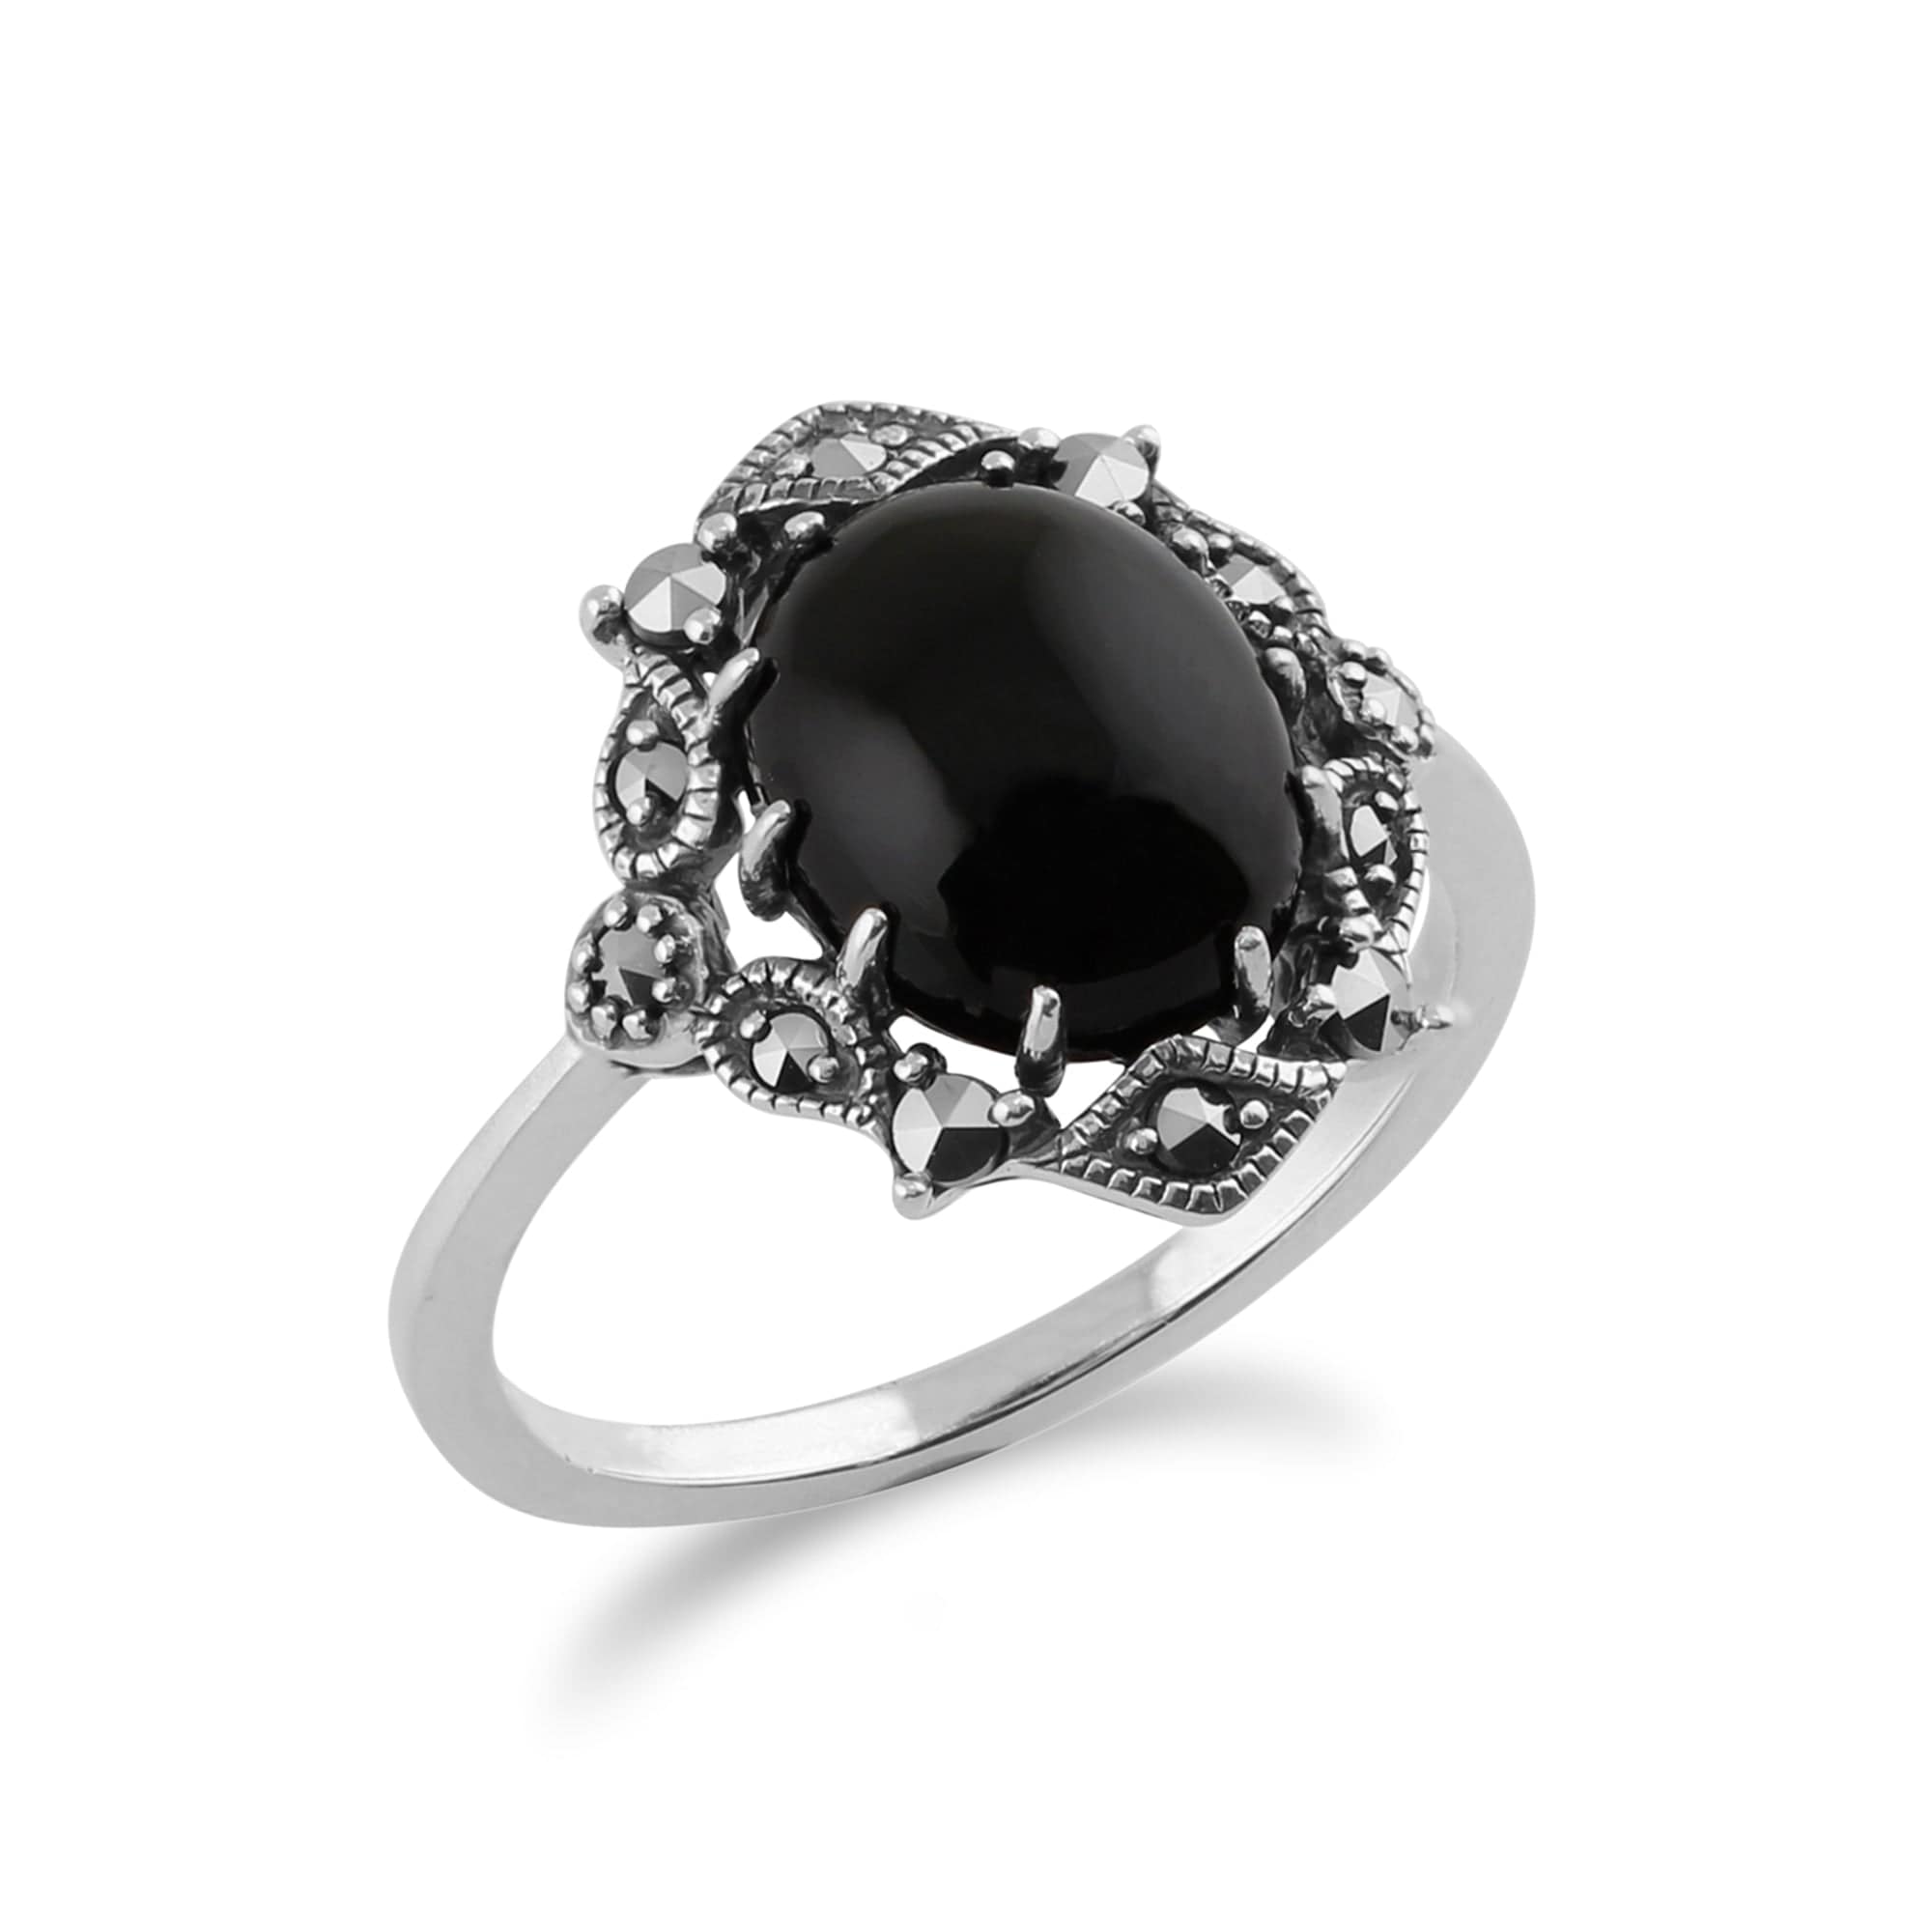 214R480001925 Art Nouveau Style Statement Ring Oval Black Onyx Cabochon & Marcasite 925 Sterling Silver 2